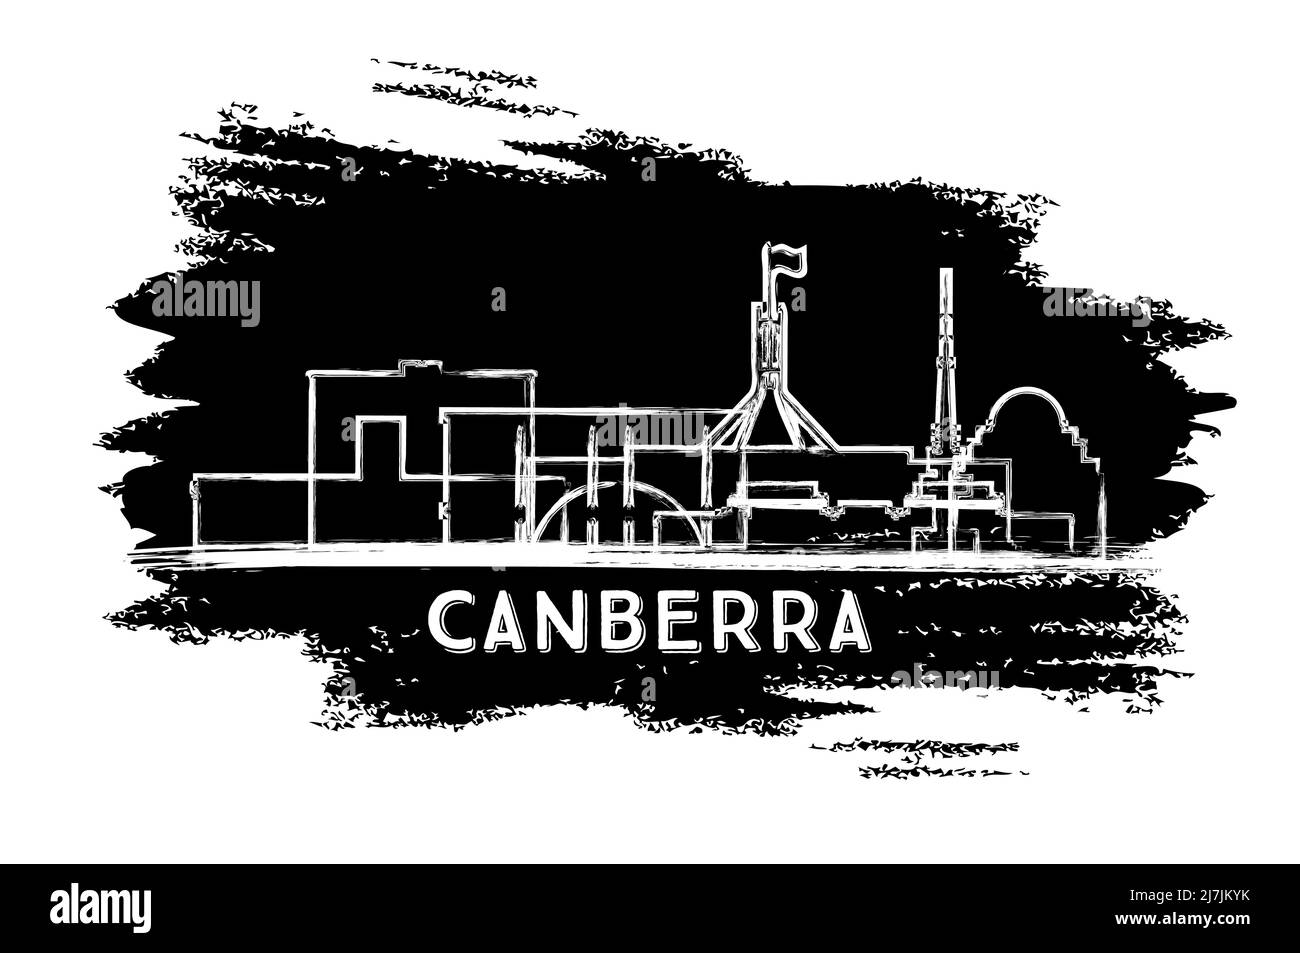 Canberra Australia City Skyline Silhouette. Hand Drawn Sketch. Business Travel and Tourism Concept with Historic Architecture. Vector Illustration. Stock Vector